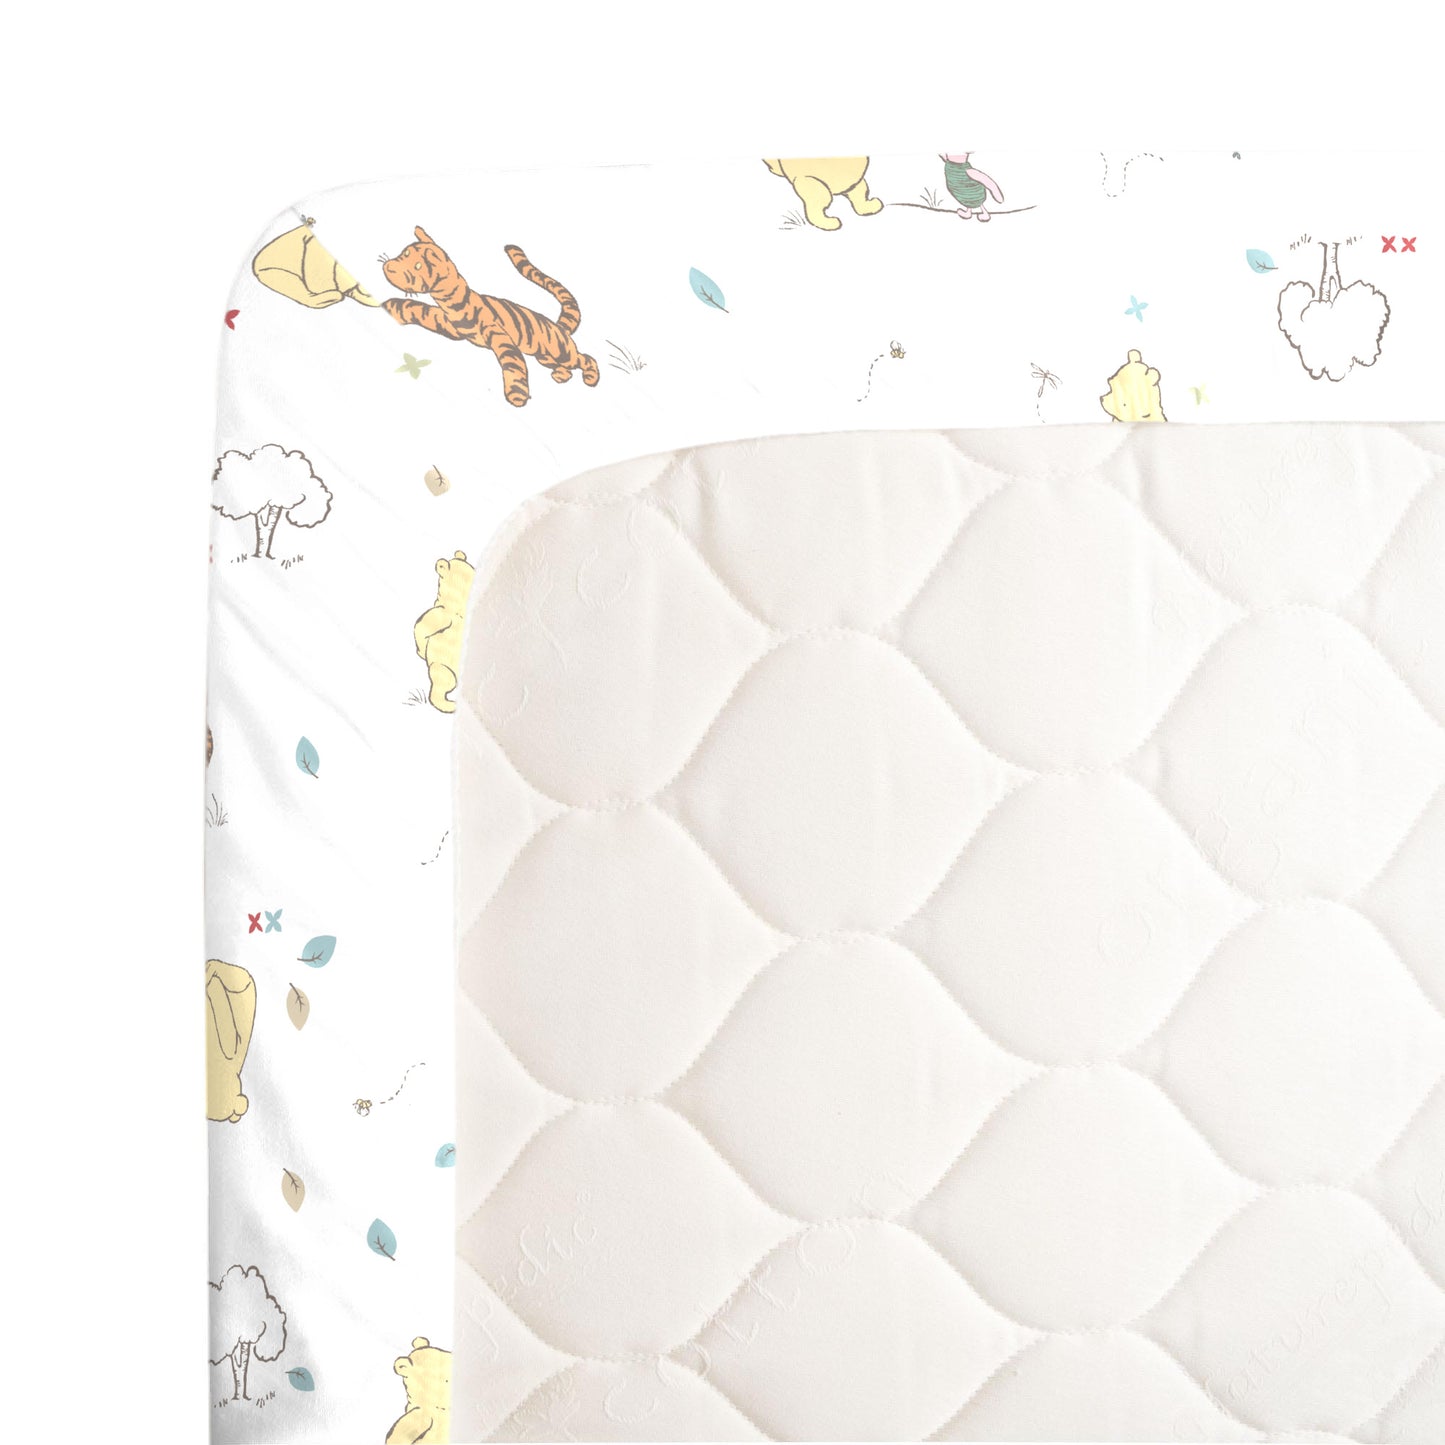 Disney Winnie the Pooh Classic Pooh 100% Cotton Fitted Crib Sheet in Ivory, Butter, Aqua and Orange